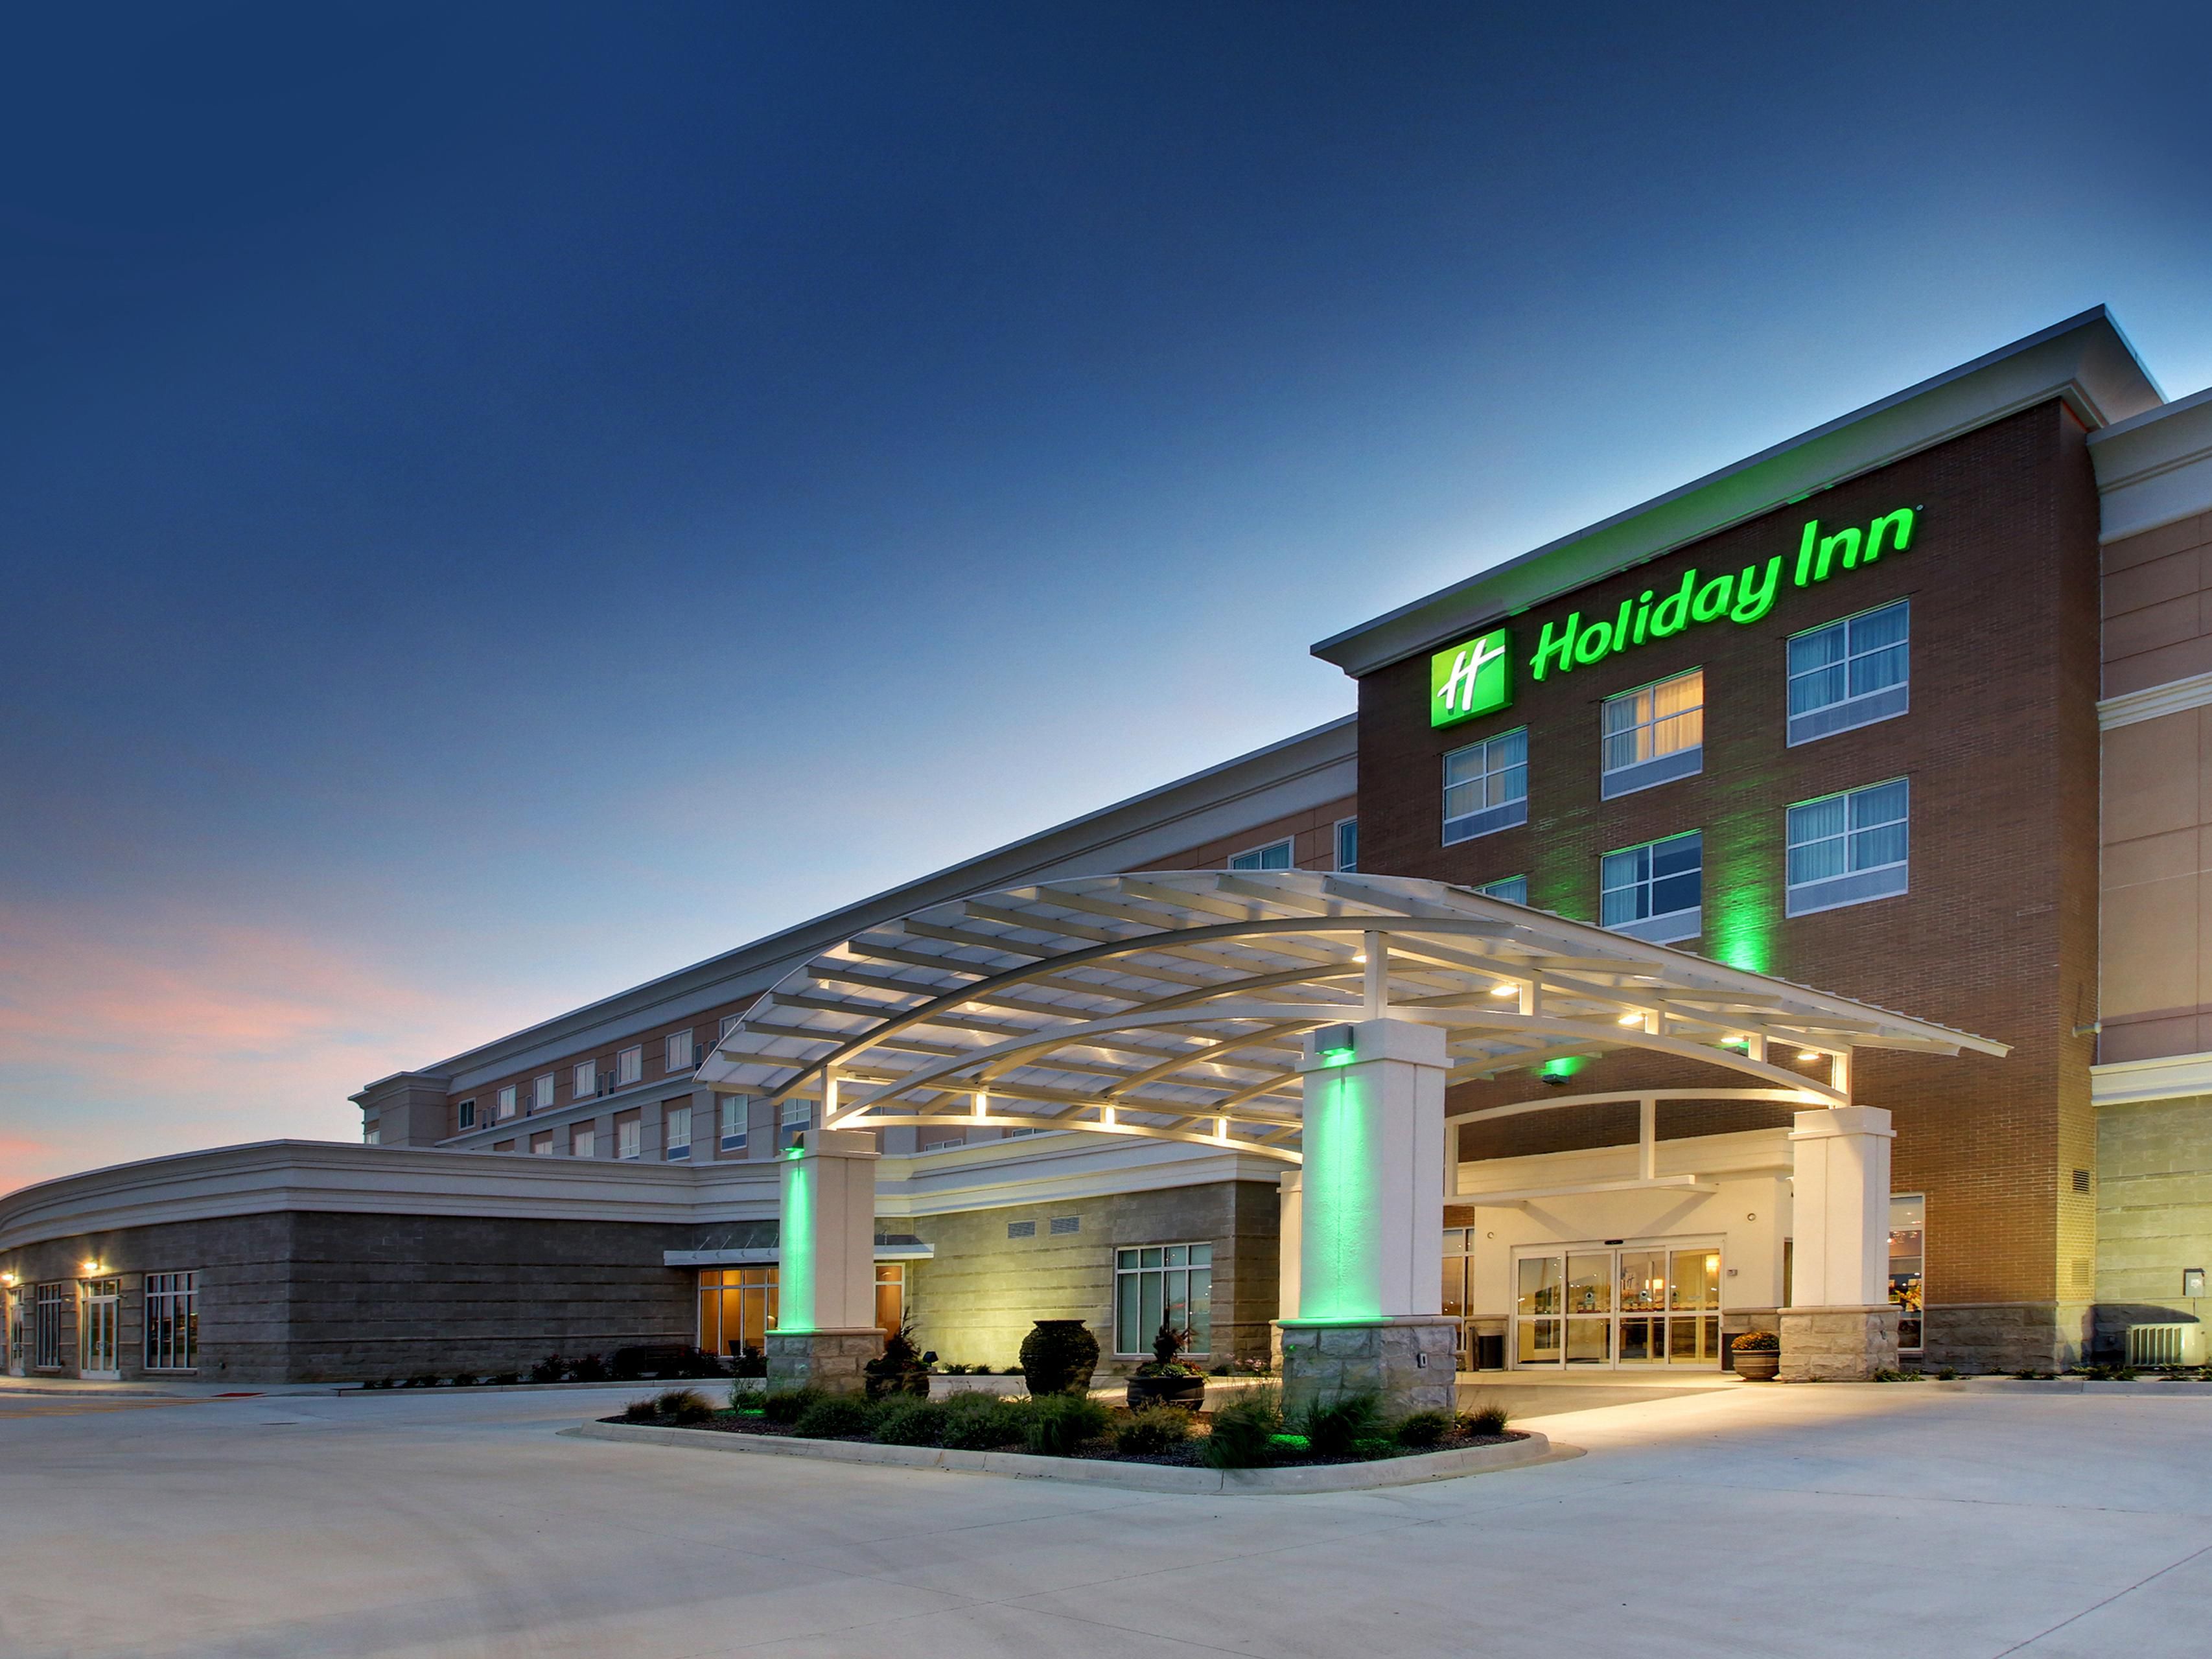 holiday-inn-hotel-and-suites-peoria-4869075908-4x3